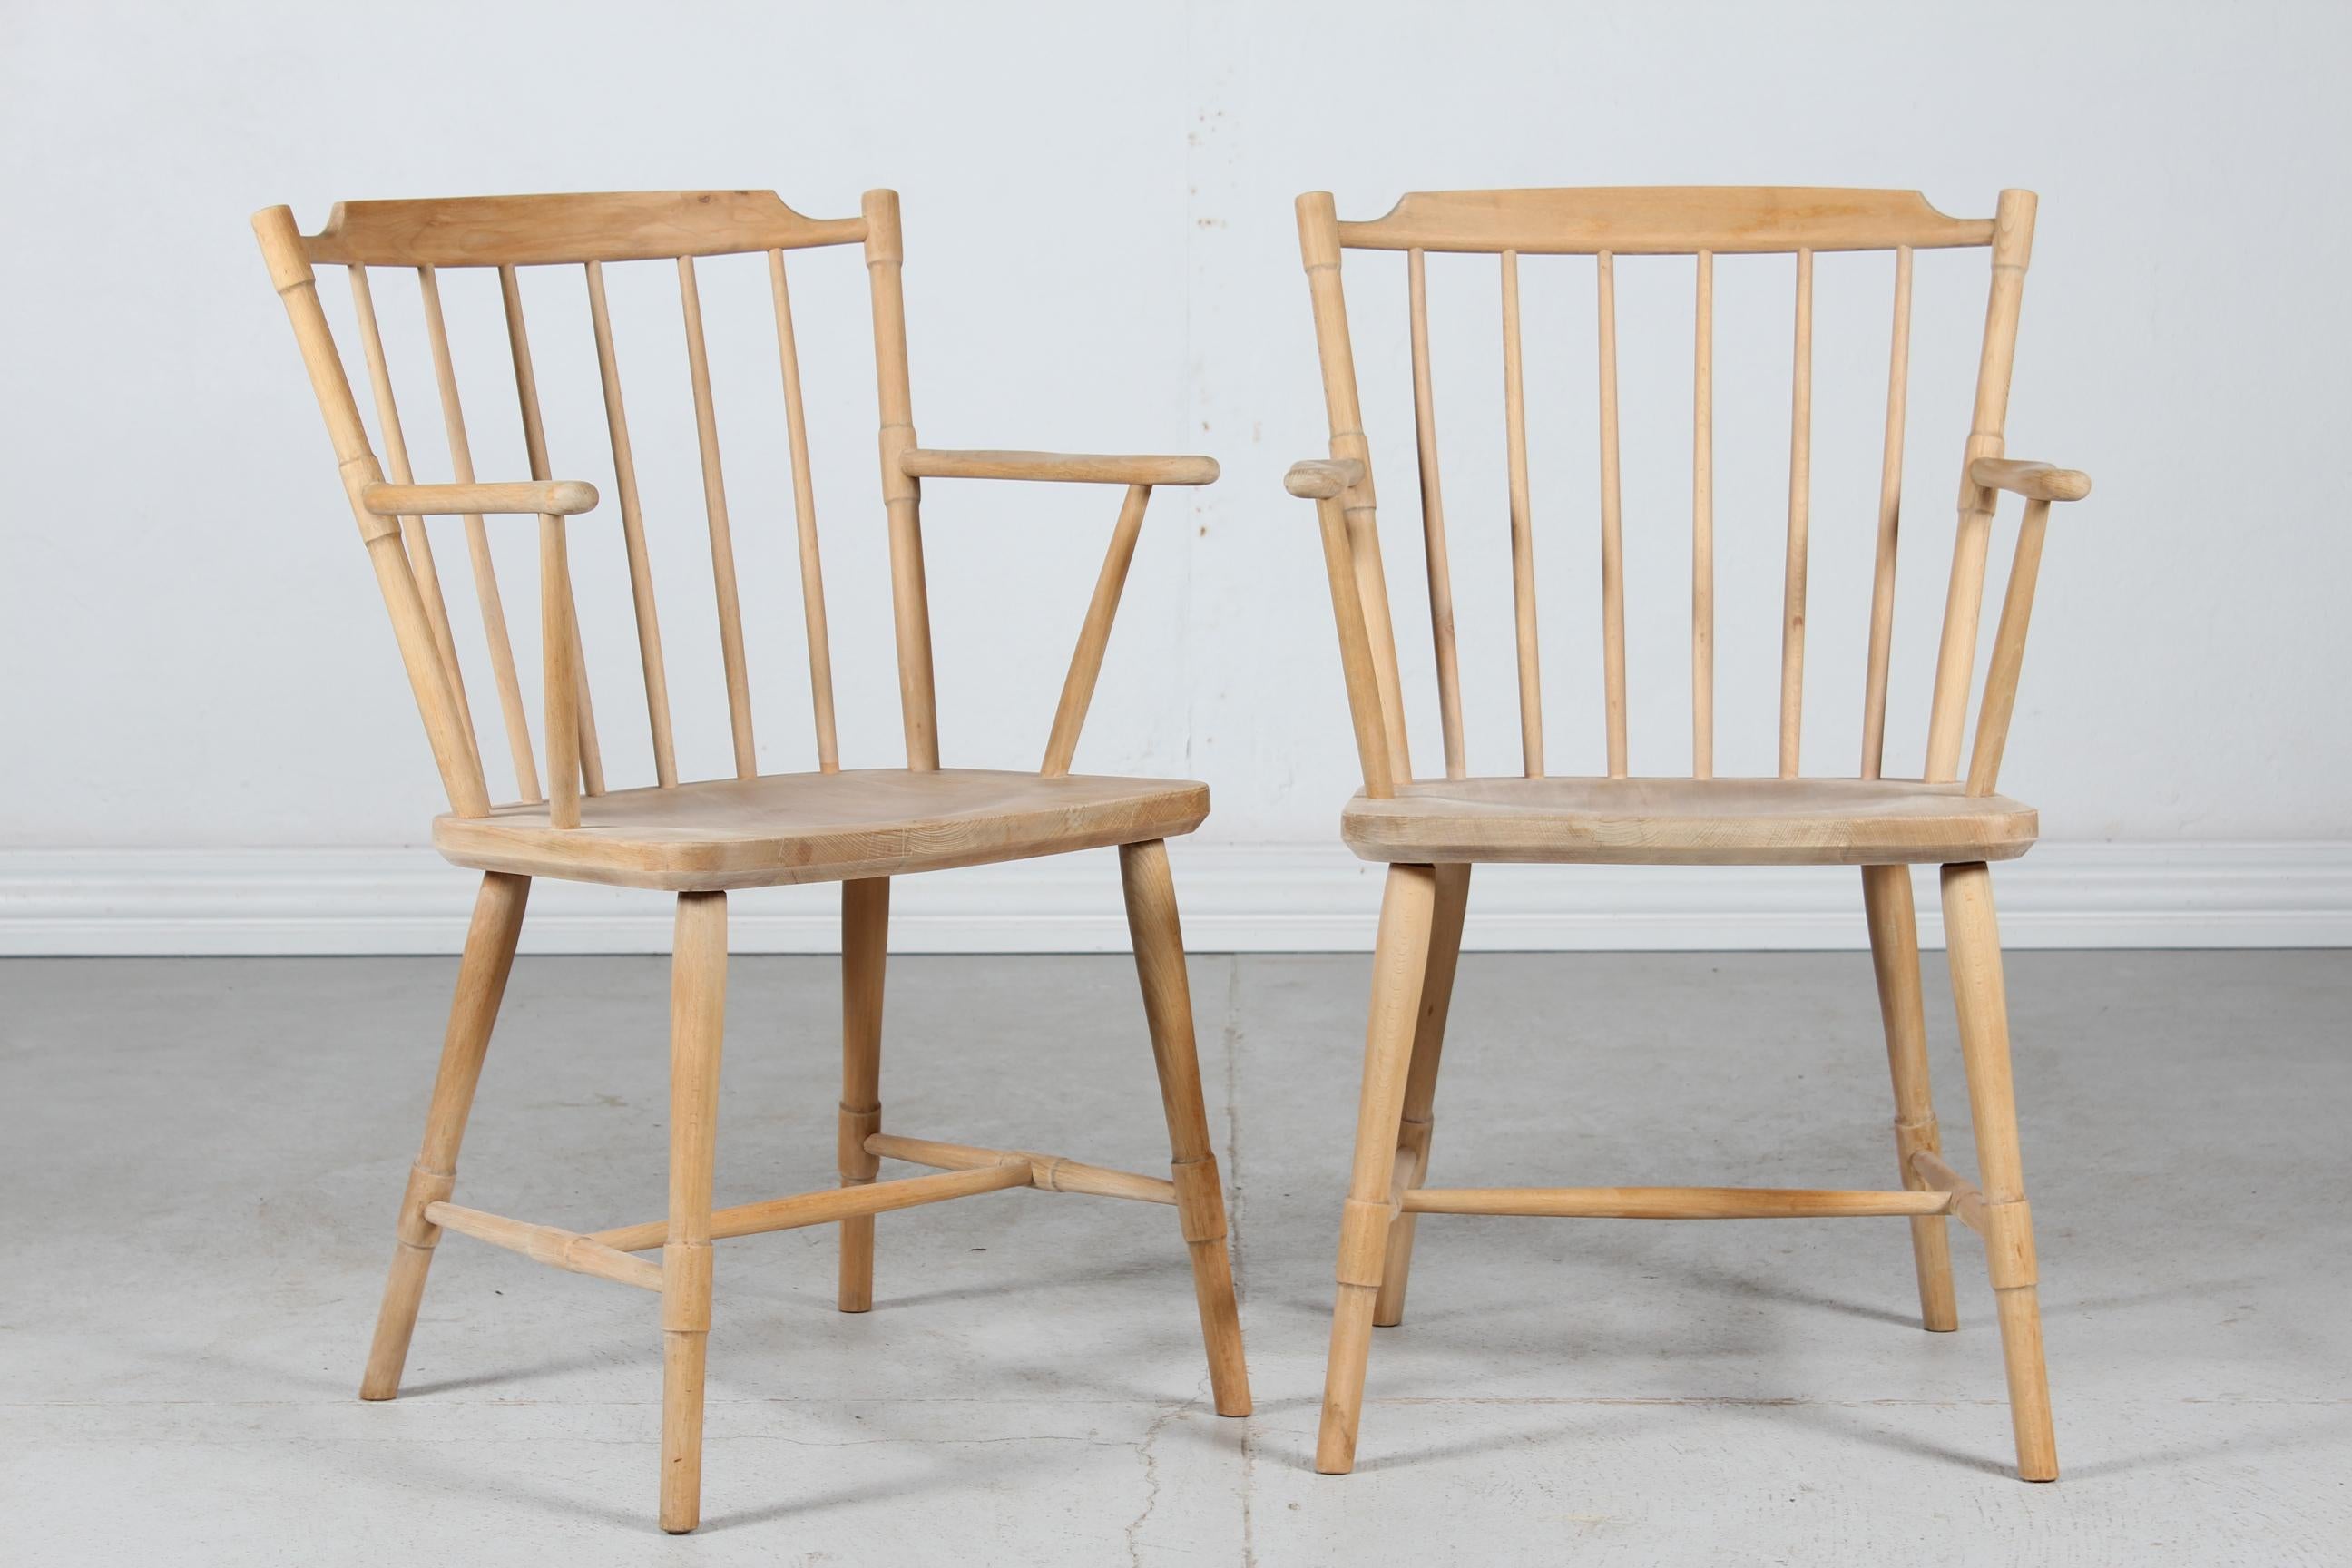 Here is pair of Danish modern Windsor armchairs in the style of Børge Mogensen.
The chairs are made of beech with soap treatment.

They are made in the 1970´s by a Danish Furniture Manufacturer, probably by FDB Møbler in Danmark.

Nice vintage